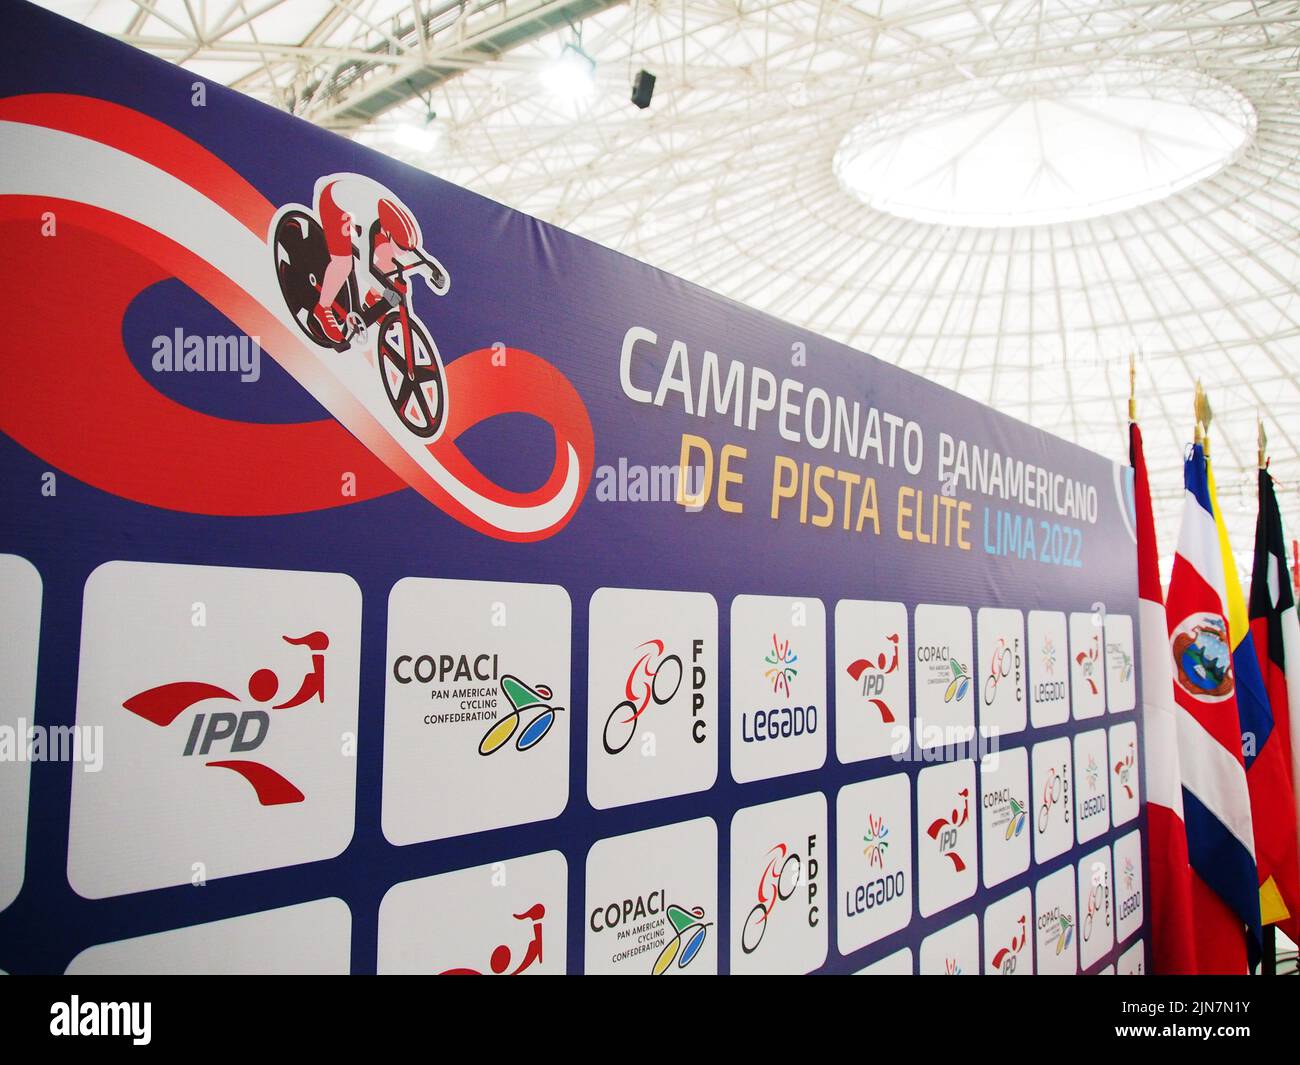 Banner of the Pan American Games at the press conference for the